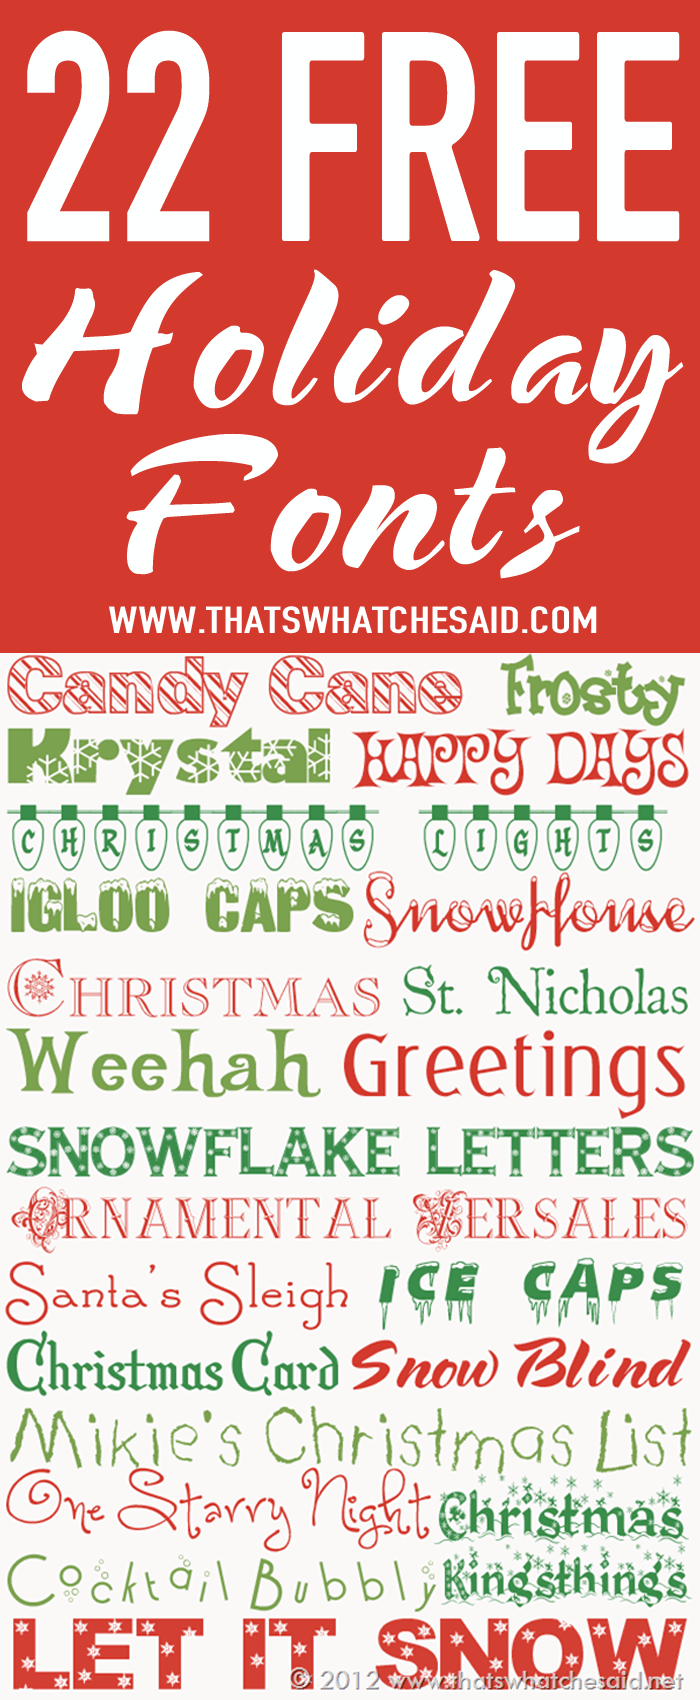 22 Free Holiday Fonts at www.thatswhatchesaid.com